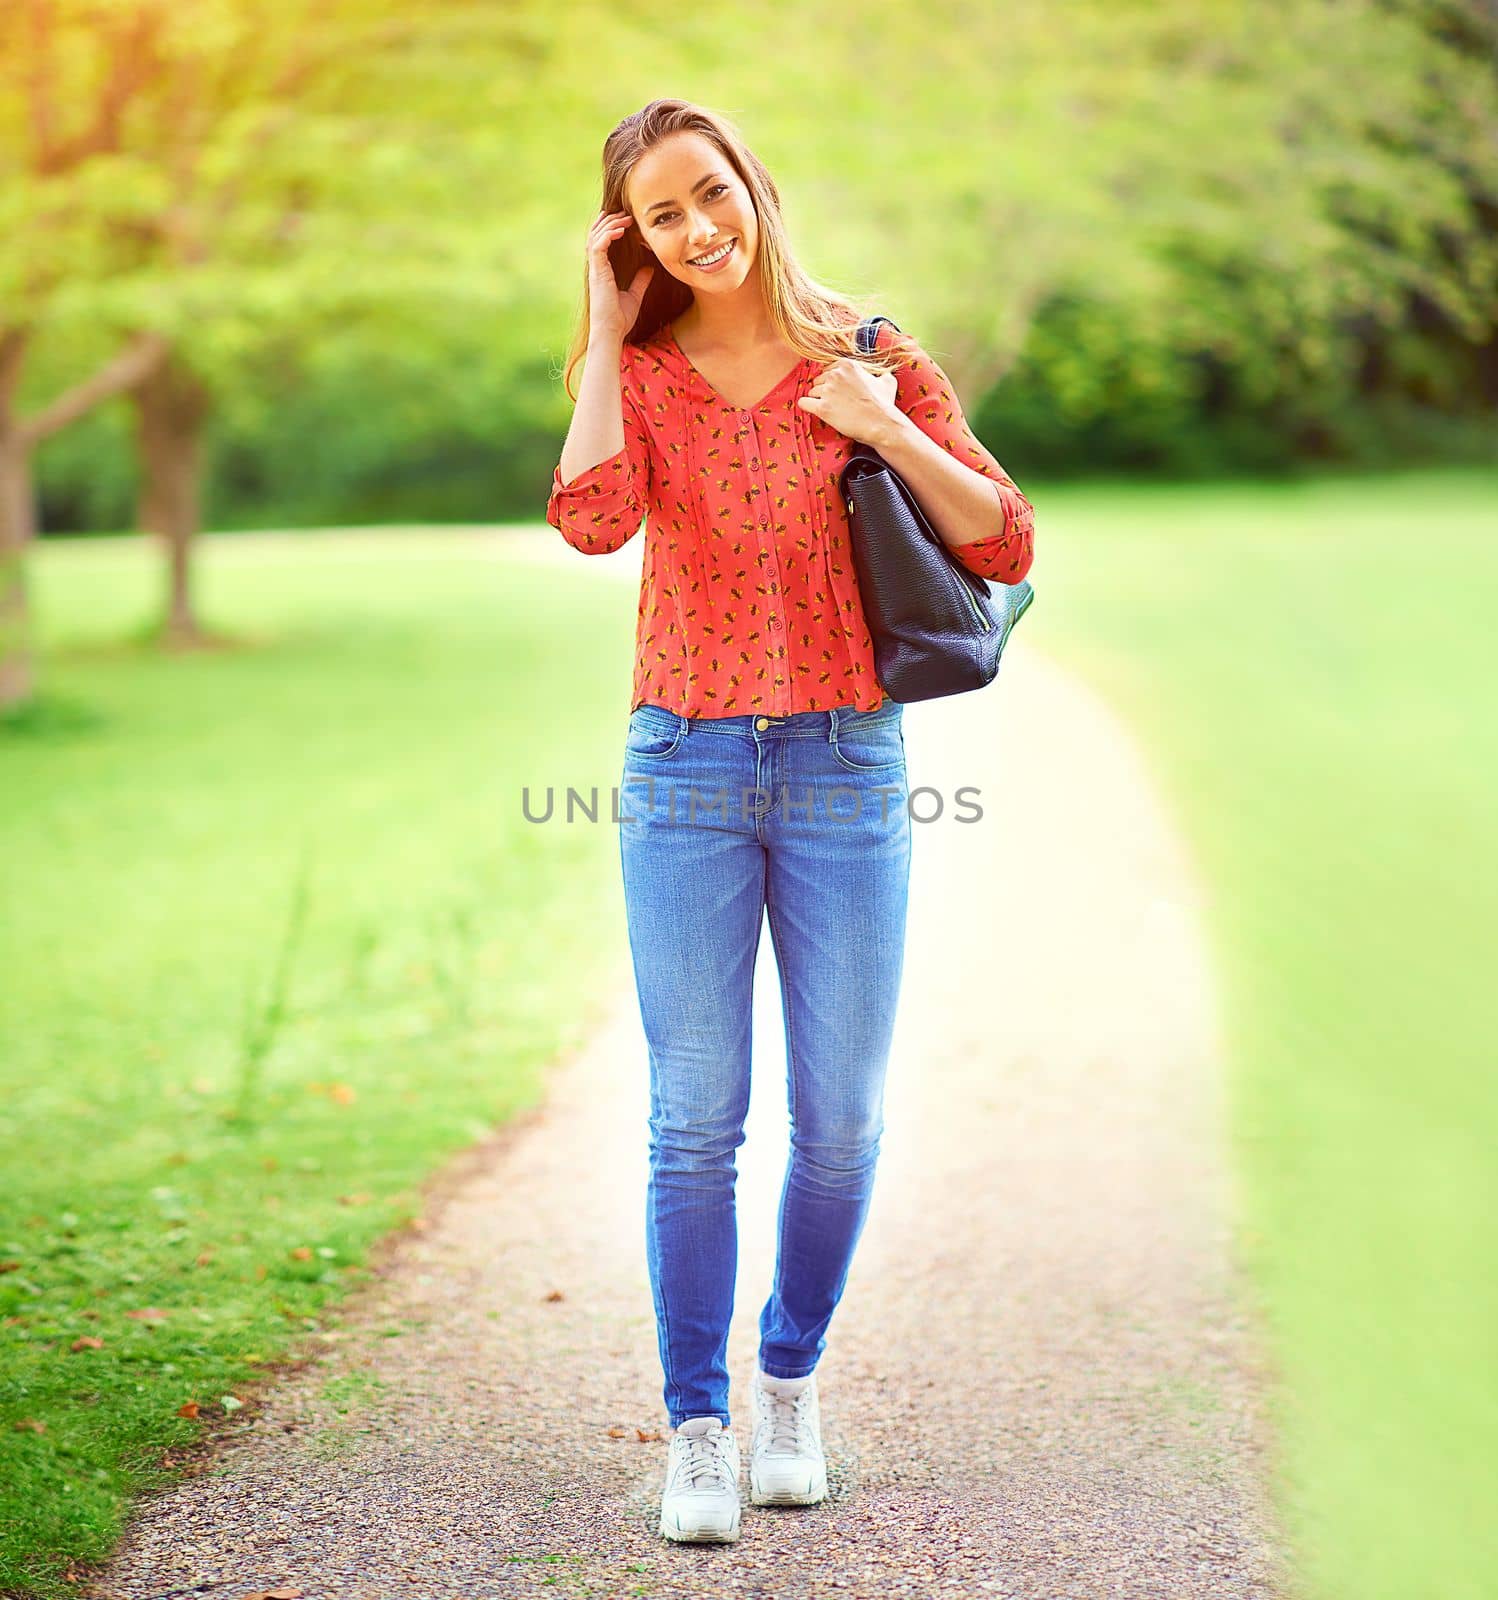 Being in the outdoors always puts a smile on my face. a young woman on a walk through the park. by YuriArcurs